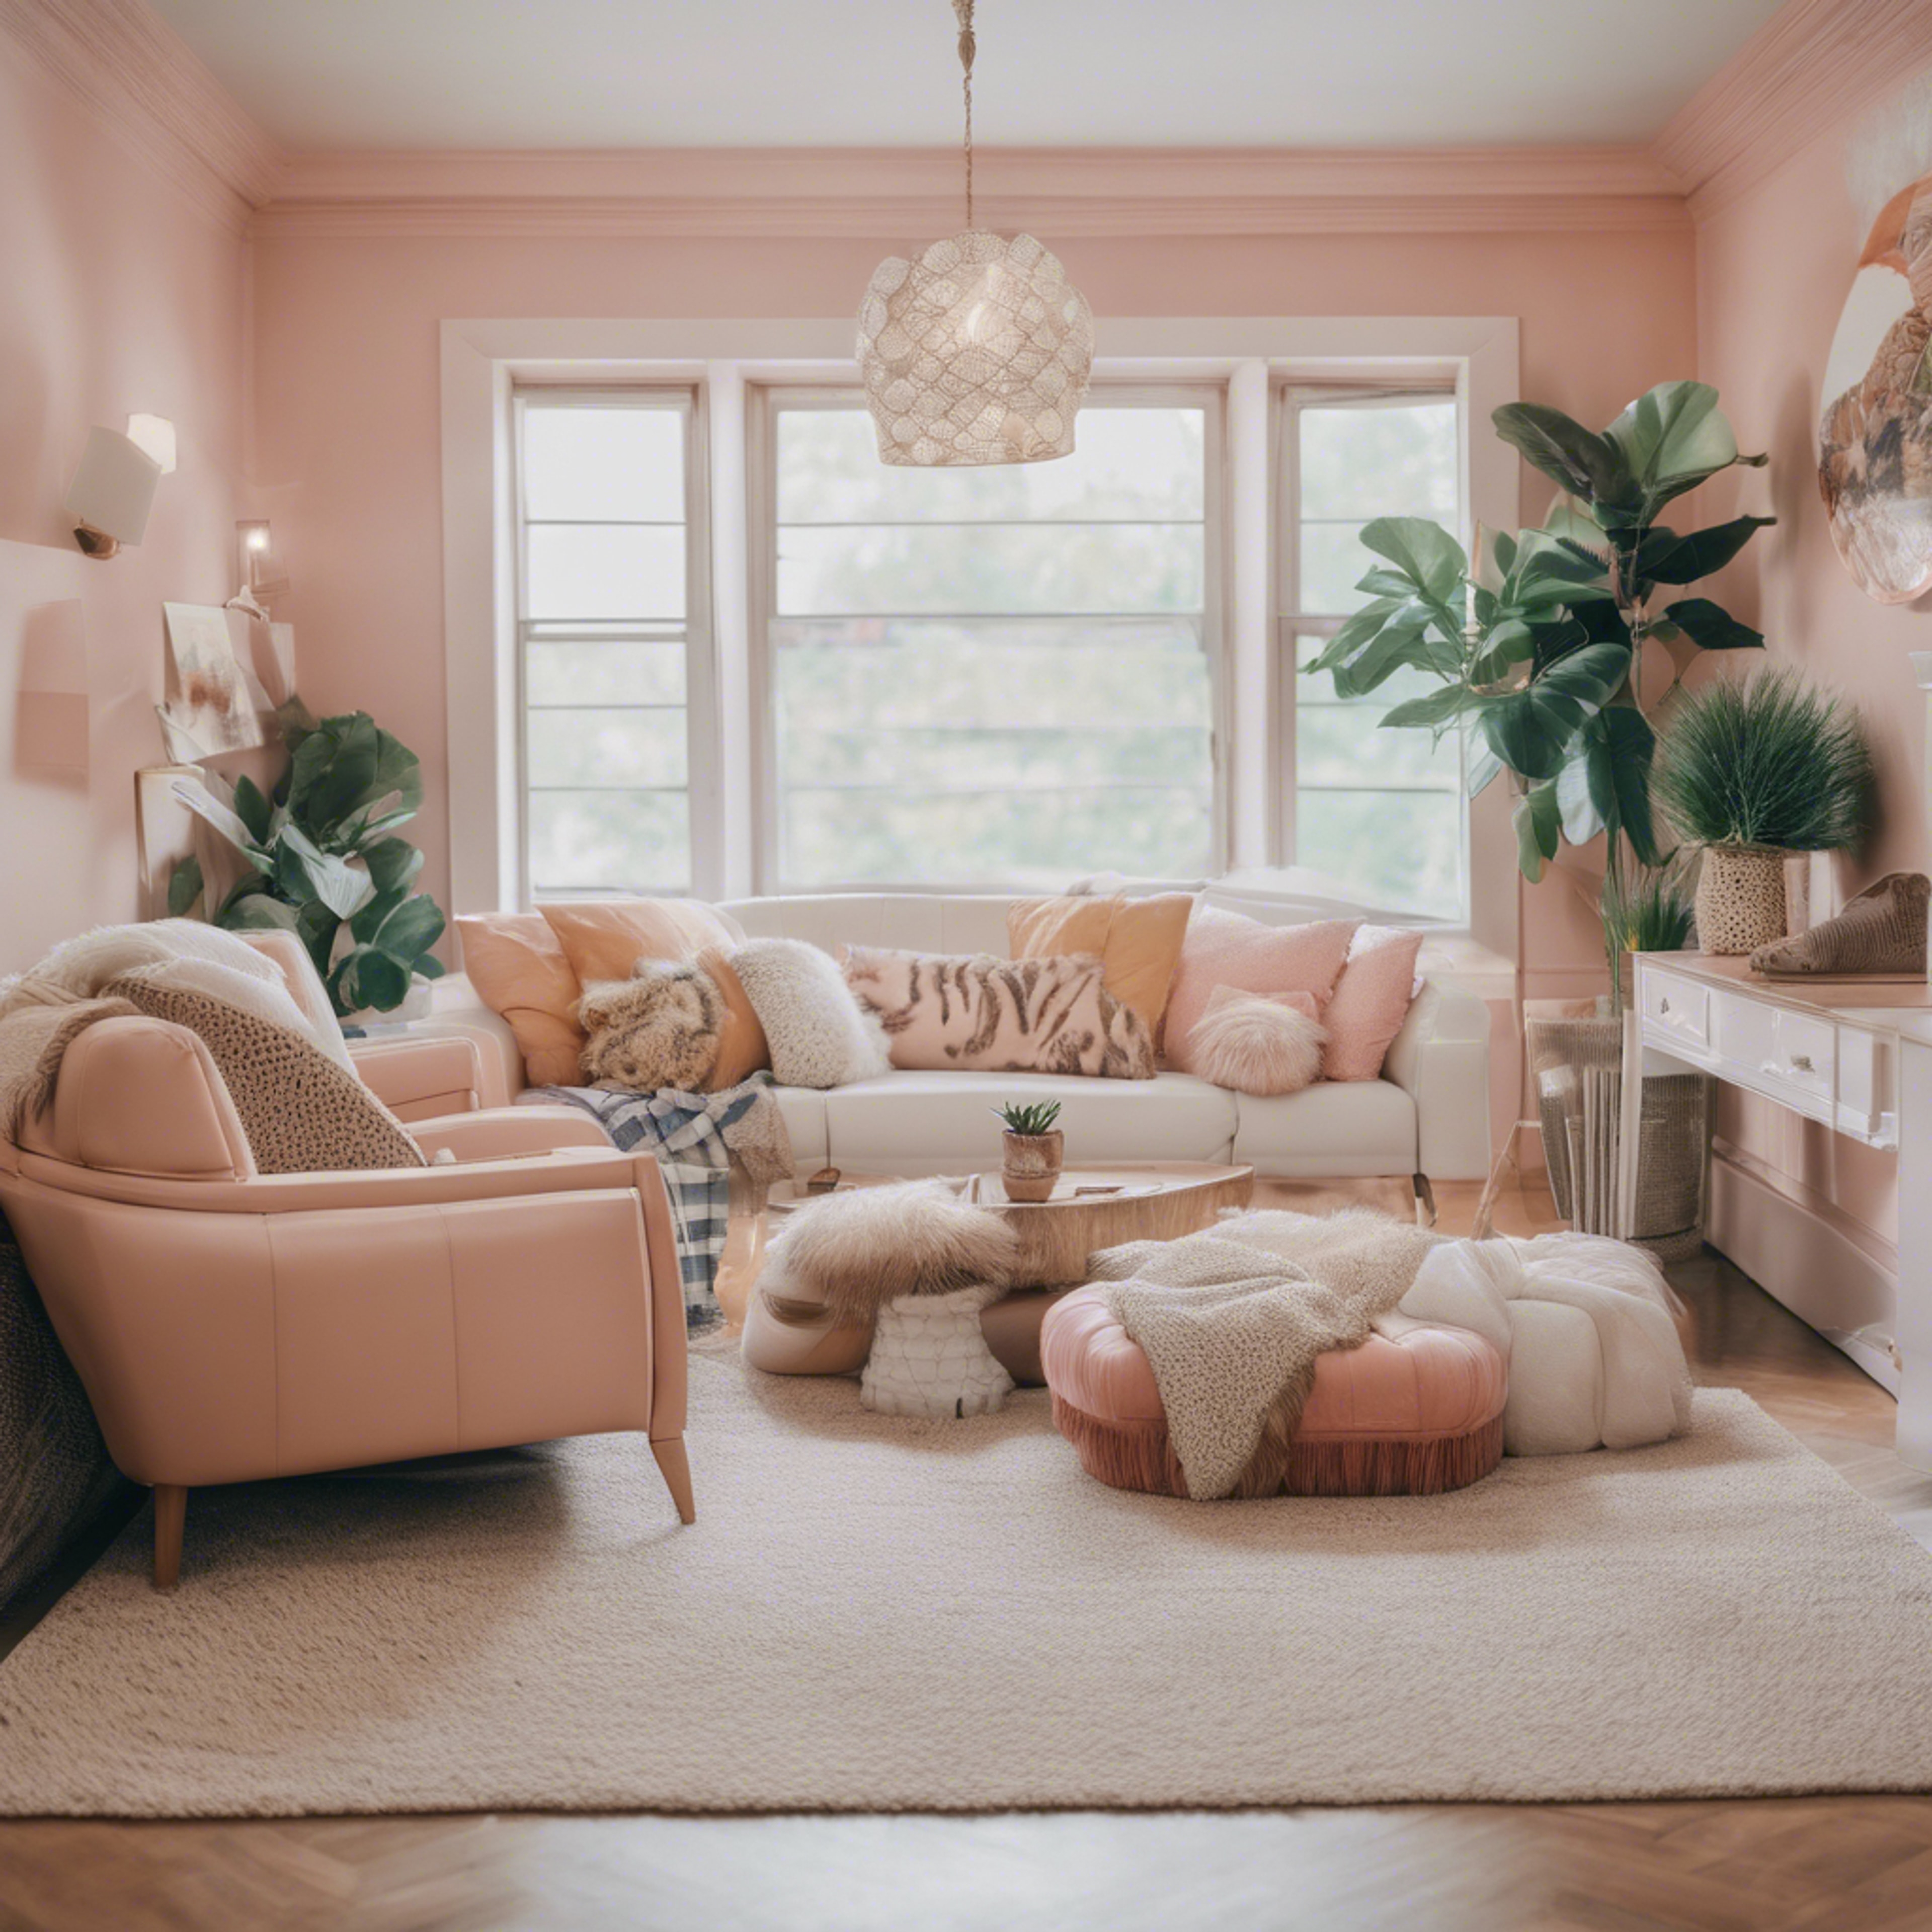 A tastefully decorated preppy aesthetic interior with animal prints, plaids, and pastel colors. Ფონი[013da7e2e0464972ad87]